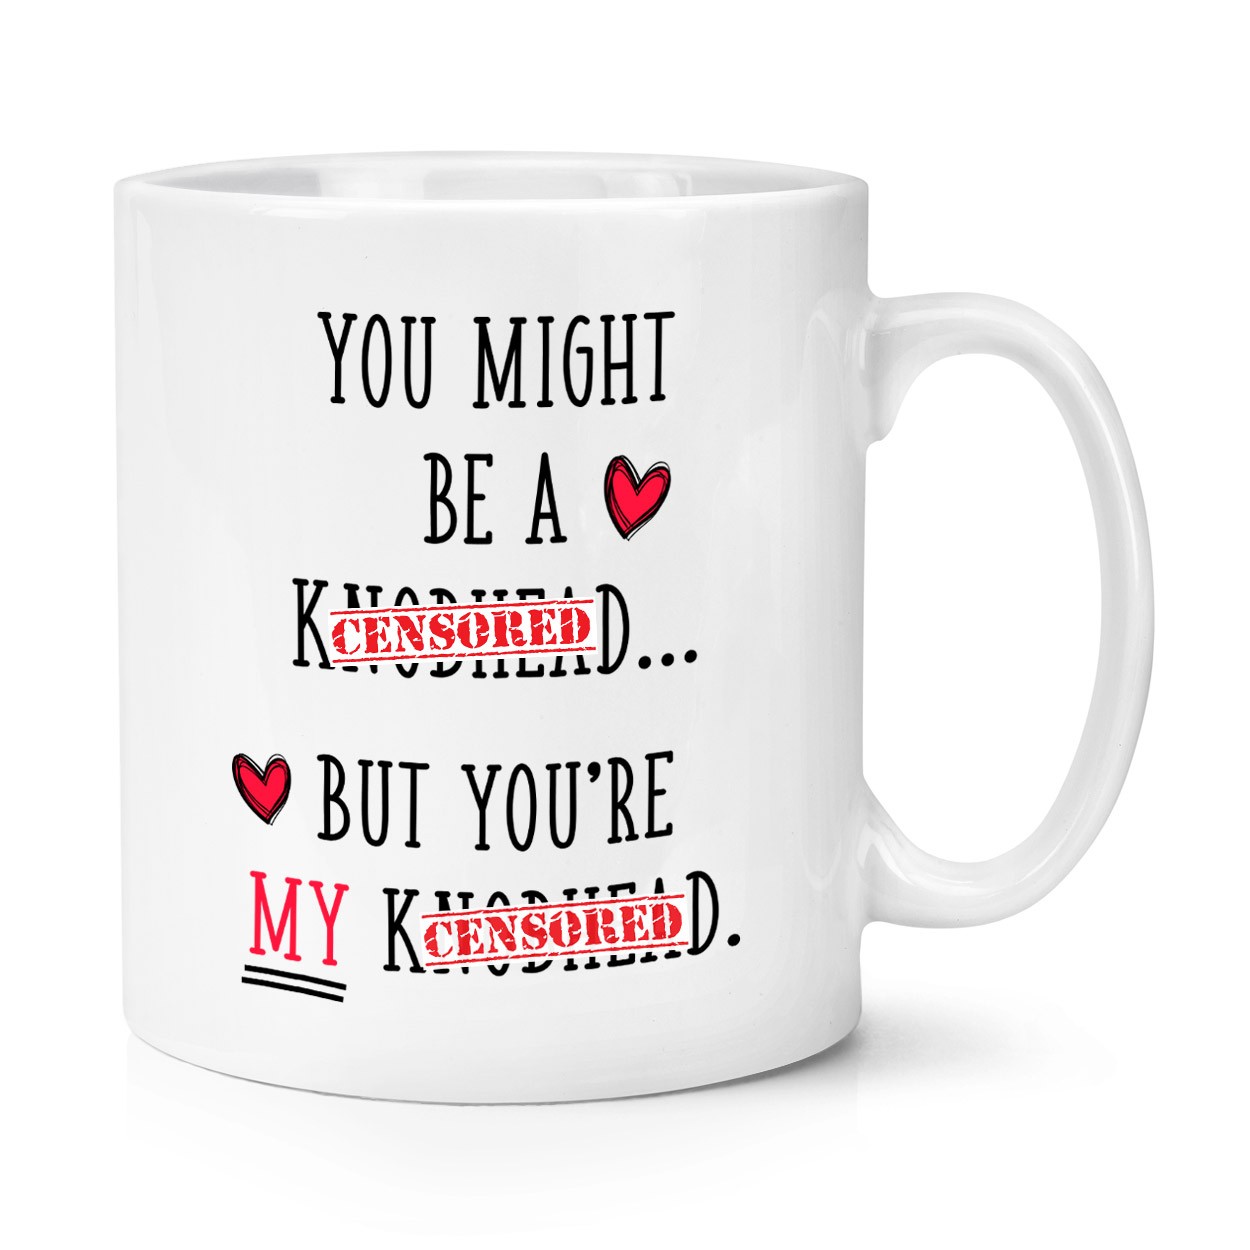 You Might Be A Knobhead But You're My Knobhead 10oz Mug Cup